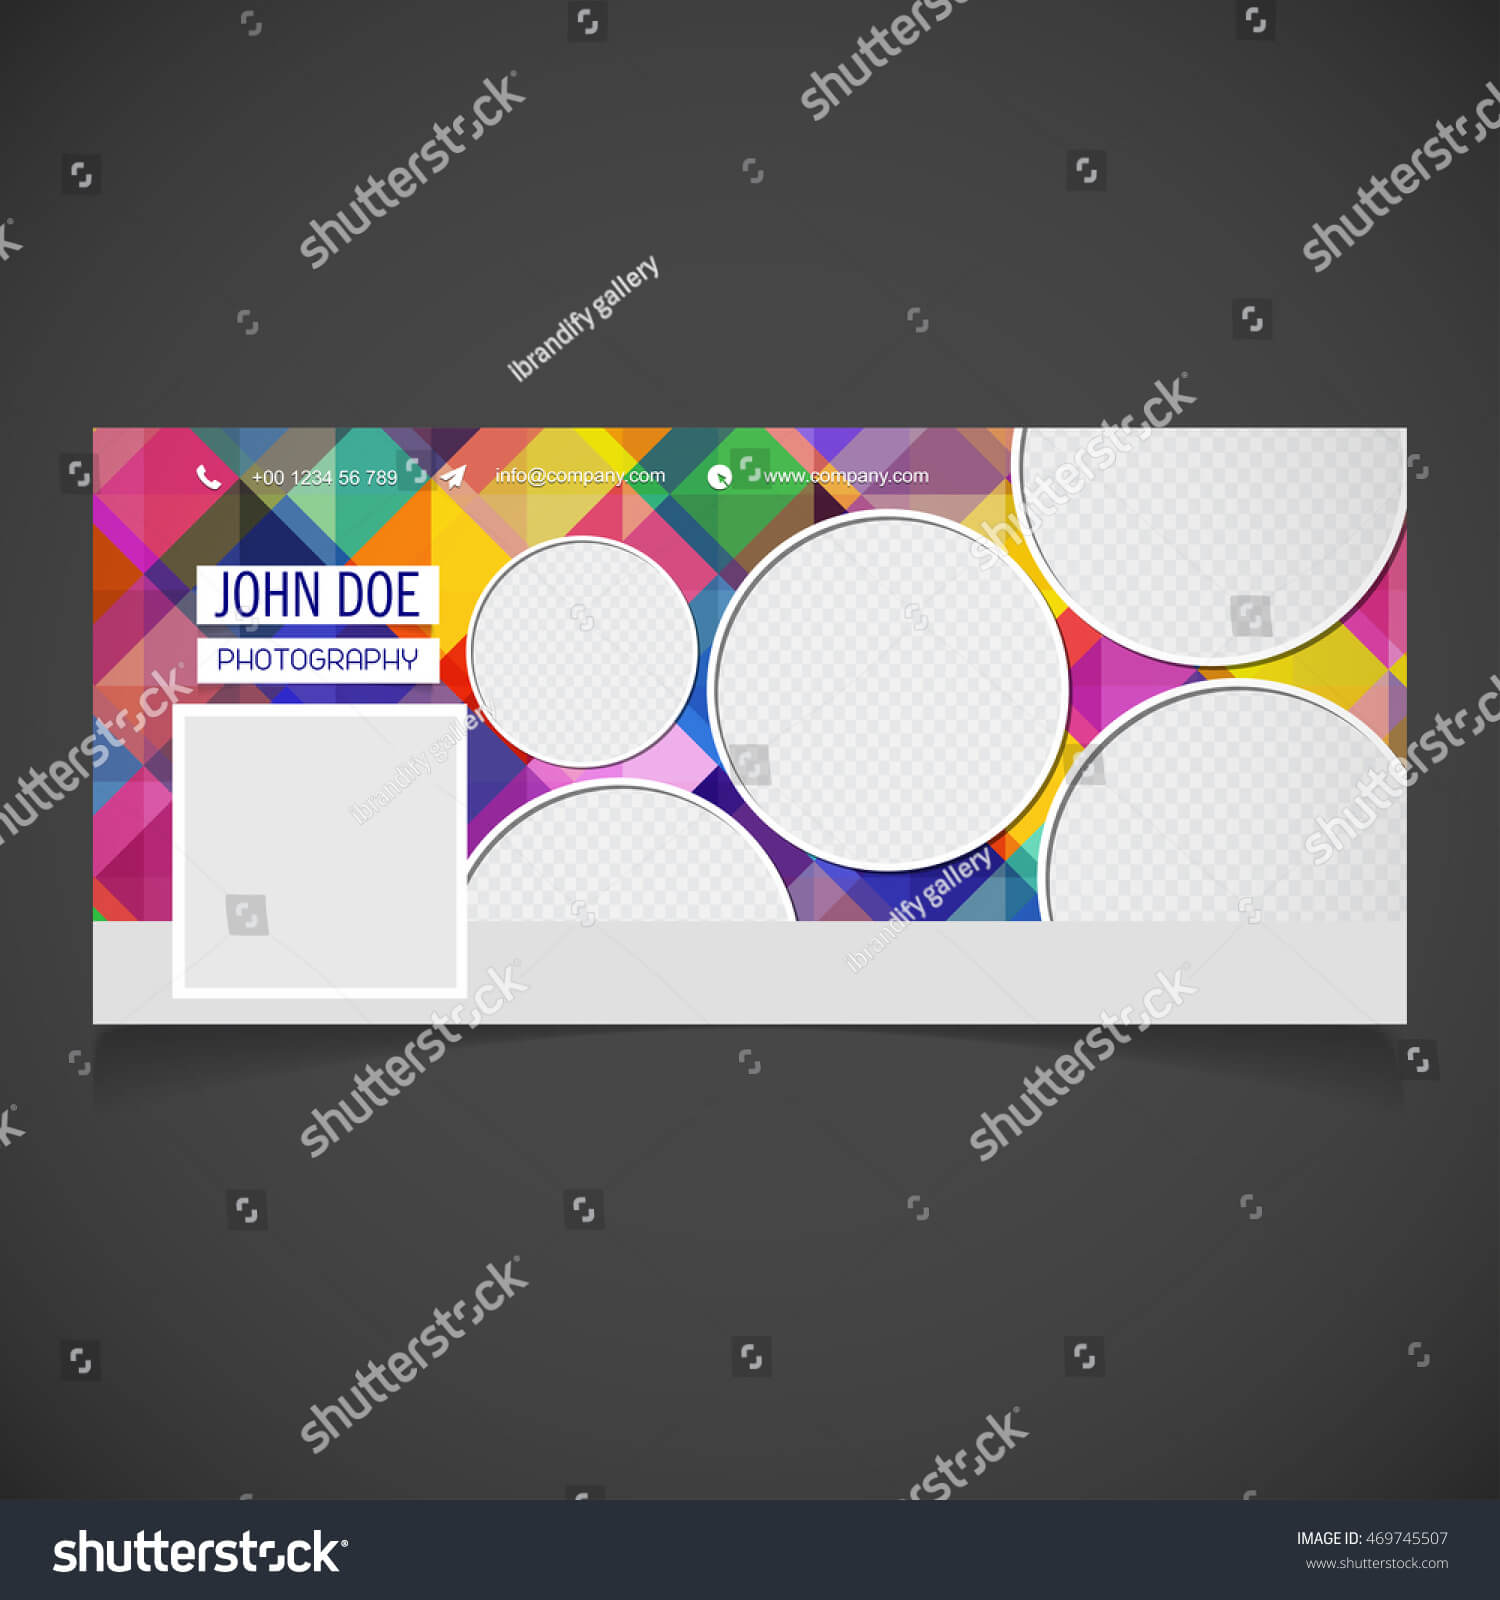 Creative Photography Banner Template Place Image Stock Image Intended For Photography Banner Template